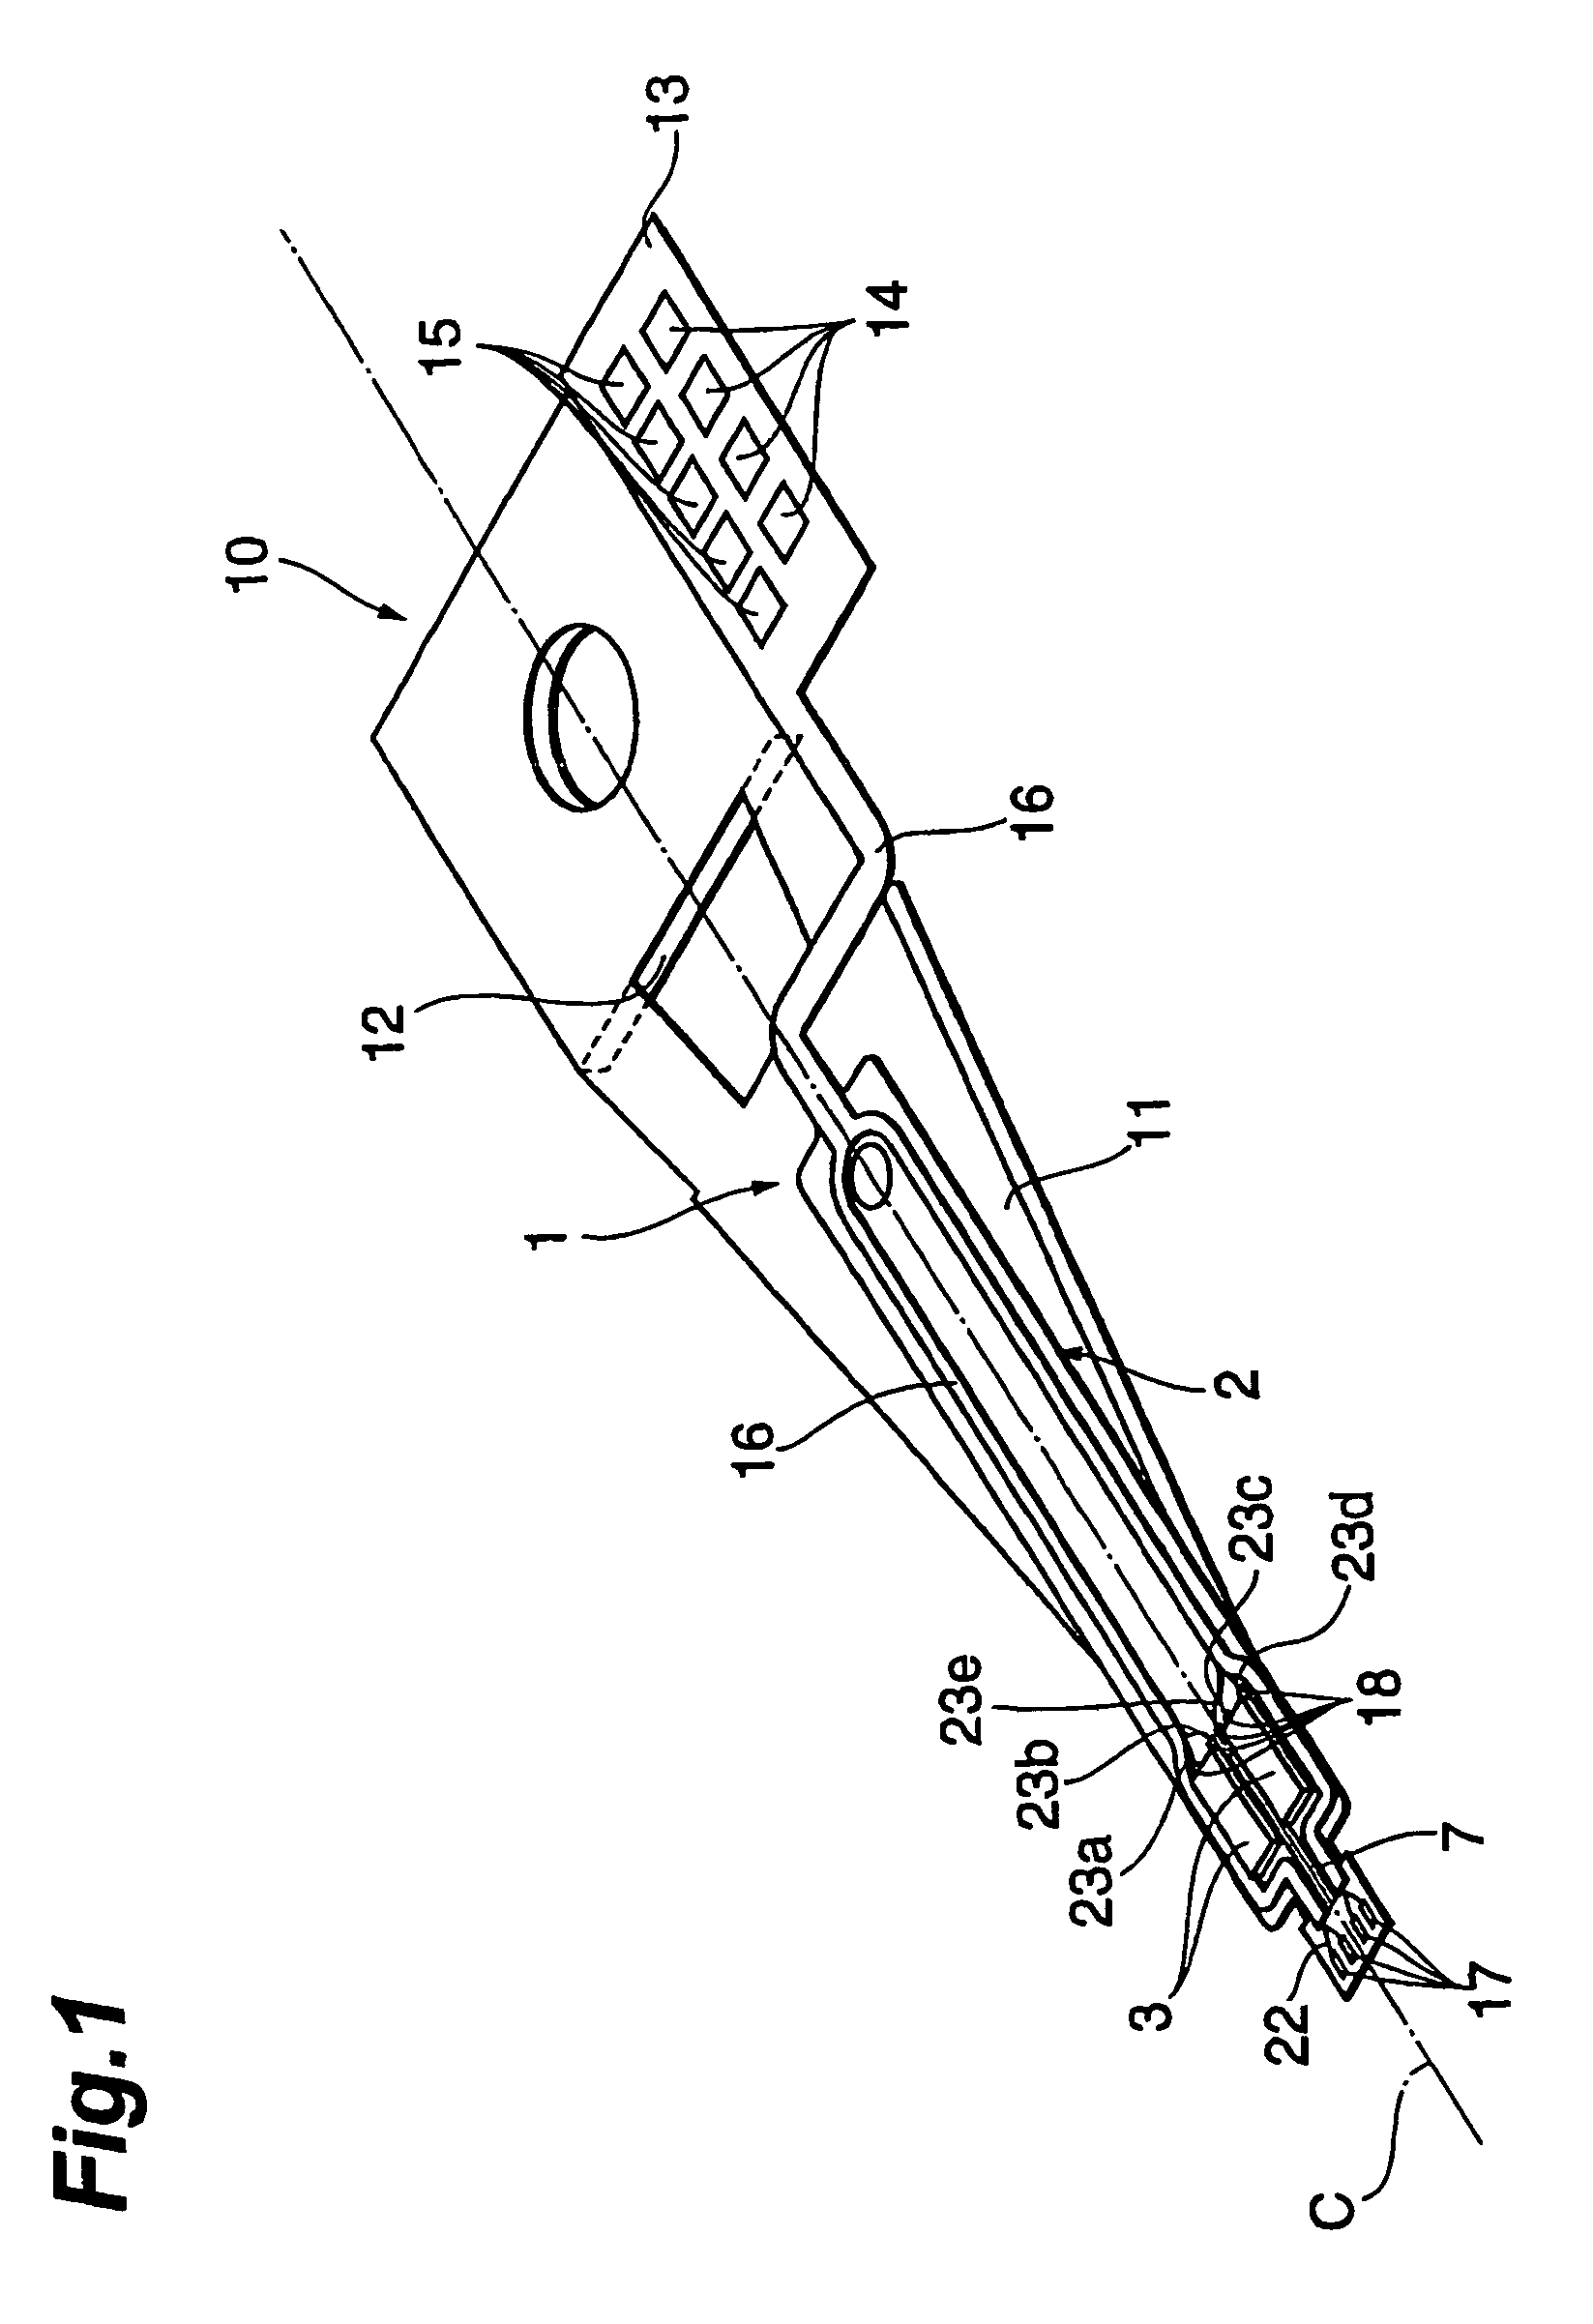 Flexible, suspension, and head gimbal assembly with piezoelectric layer units addressable by a voltage